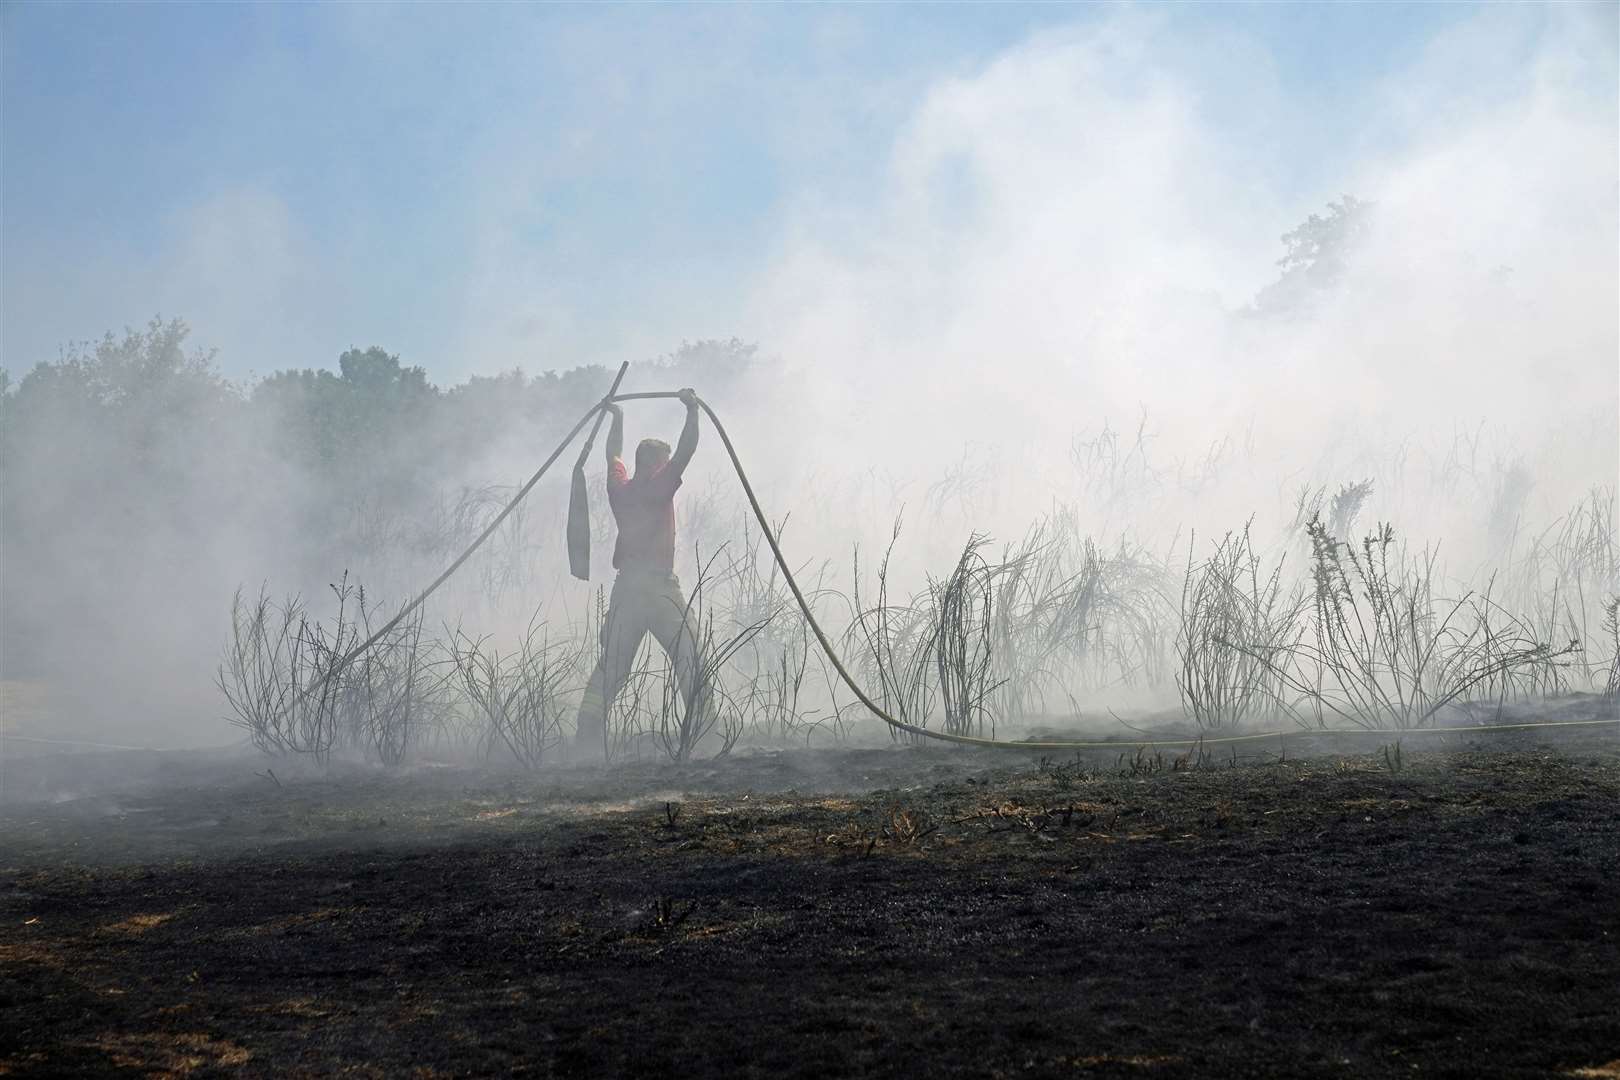 Firefighters battle a grass fire on Leyton flats in east London, as a drought has been declared for parts of England following the driest summer for 50 years (Yui Mok/PA).